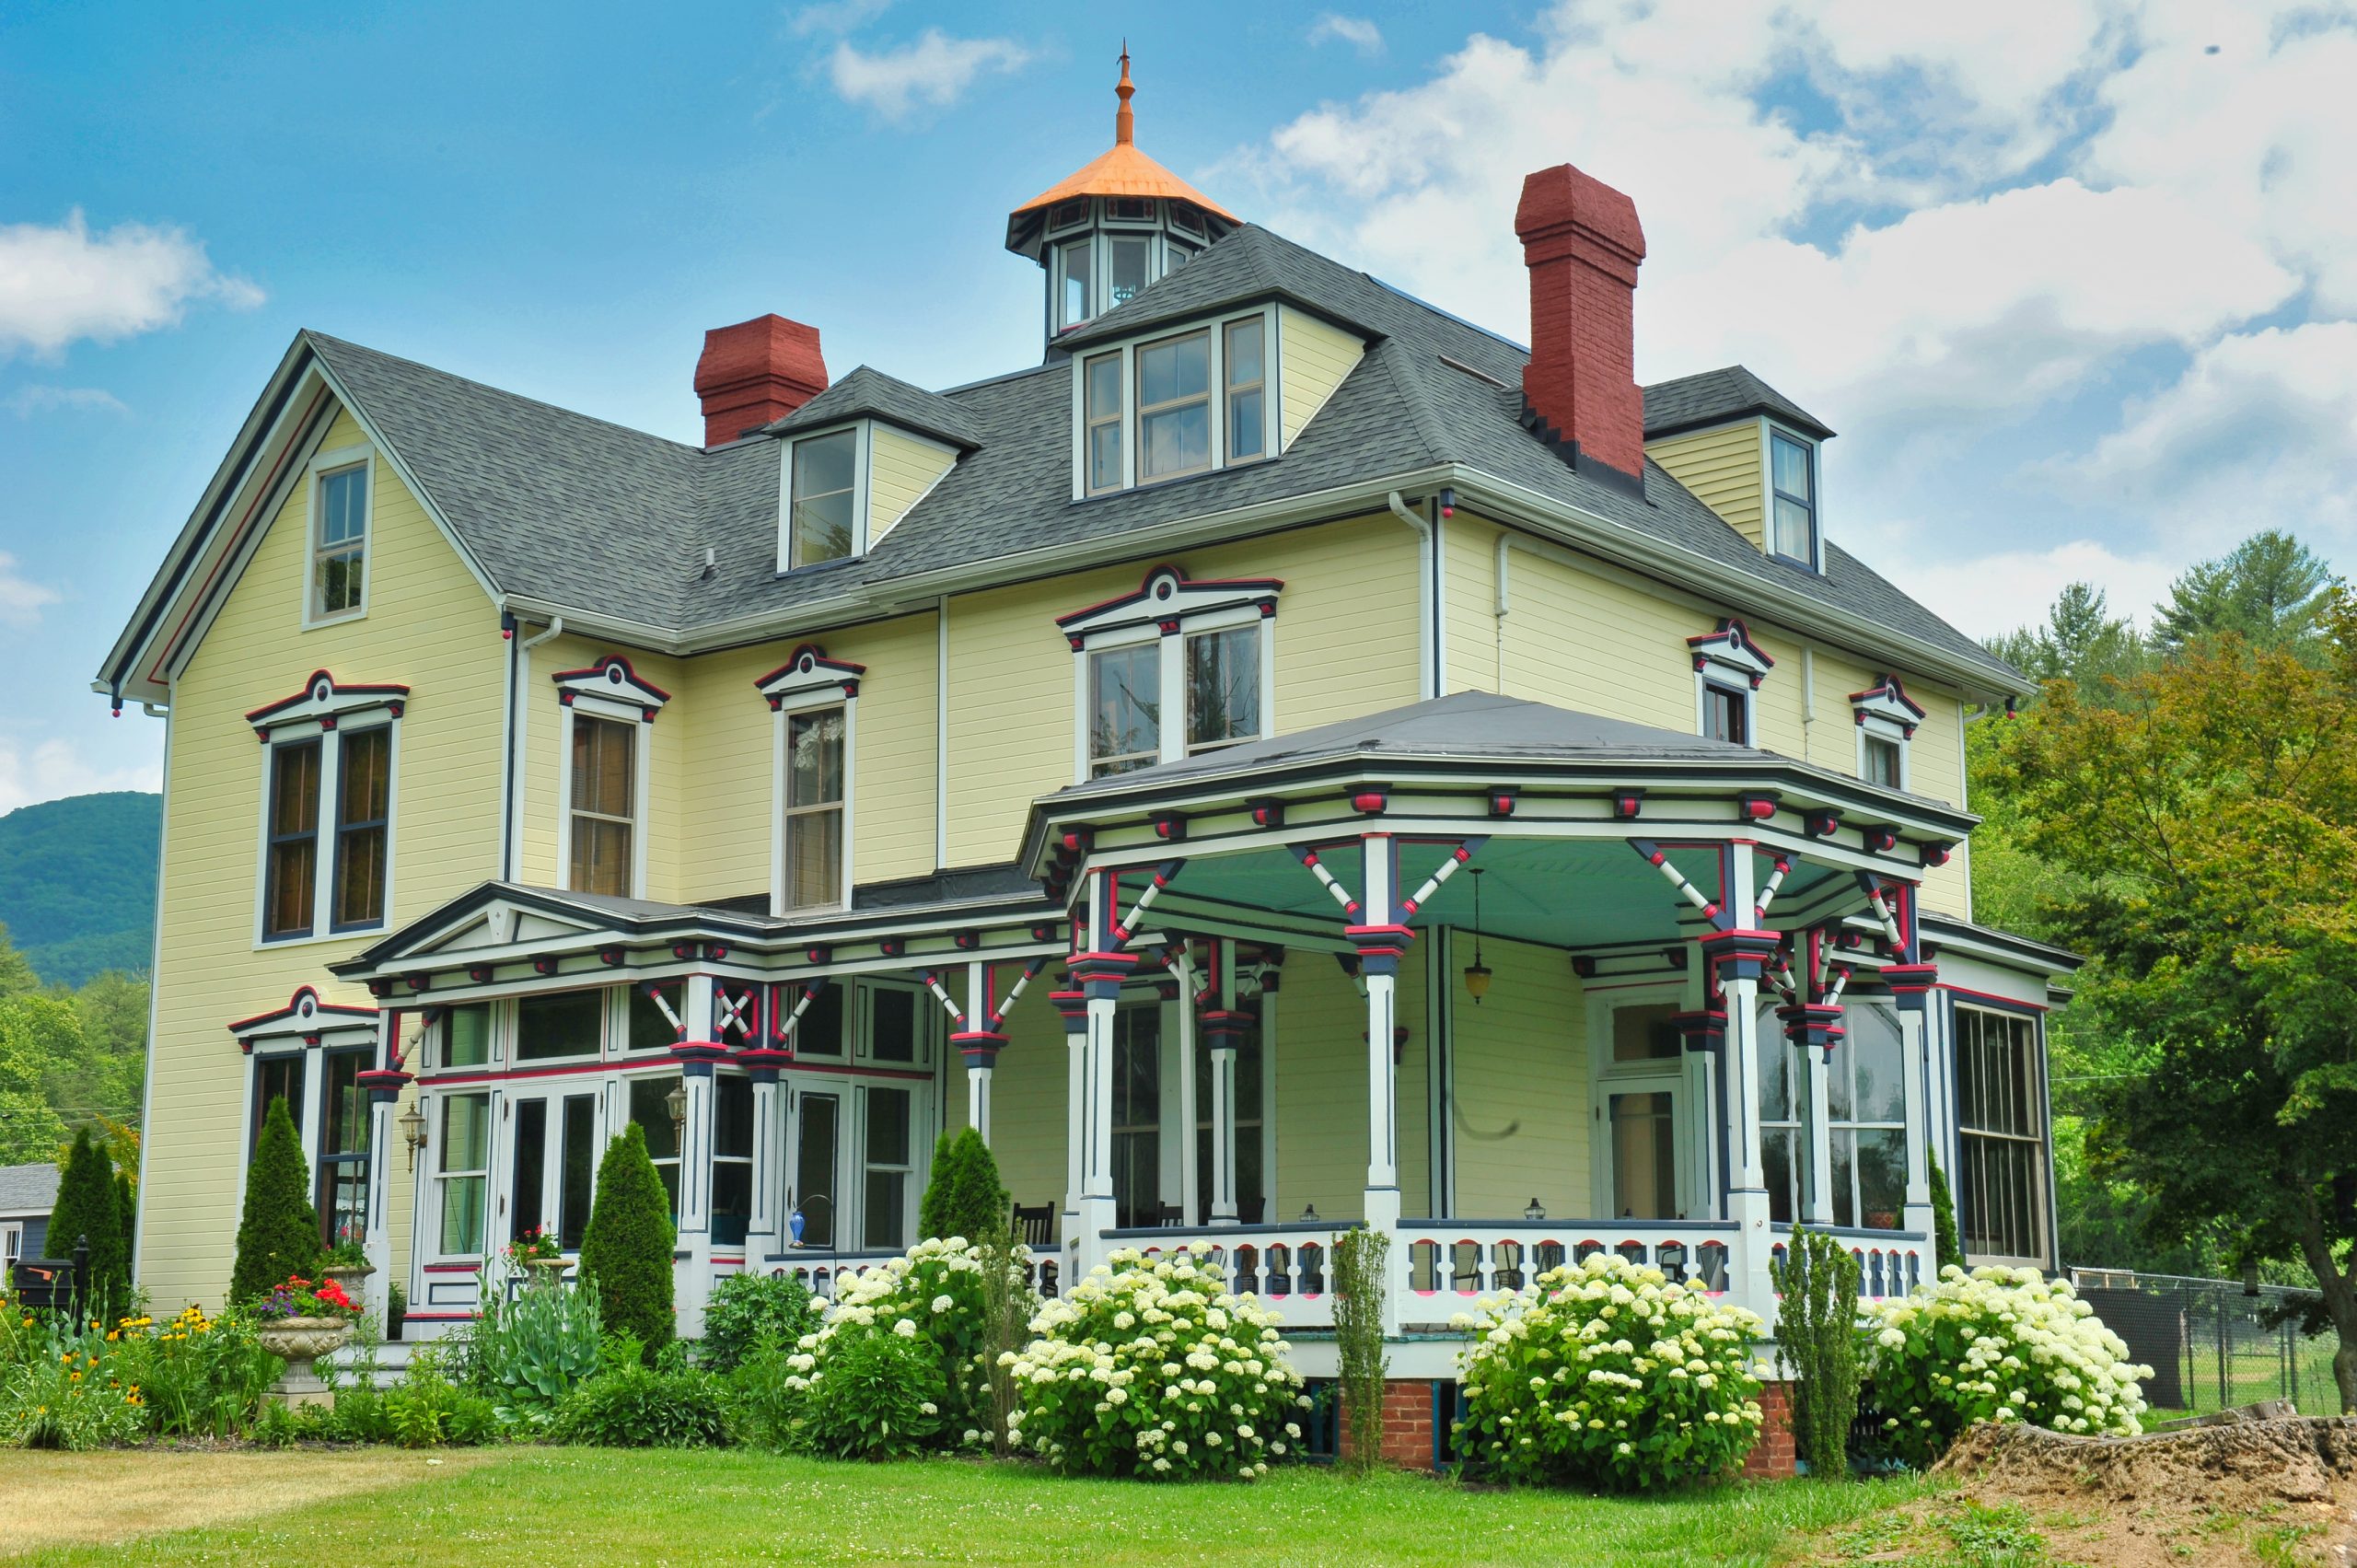 Firmstone Manor was built in 1873 and is a vacation rental destination in Clifton Forge, VA